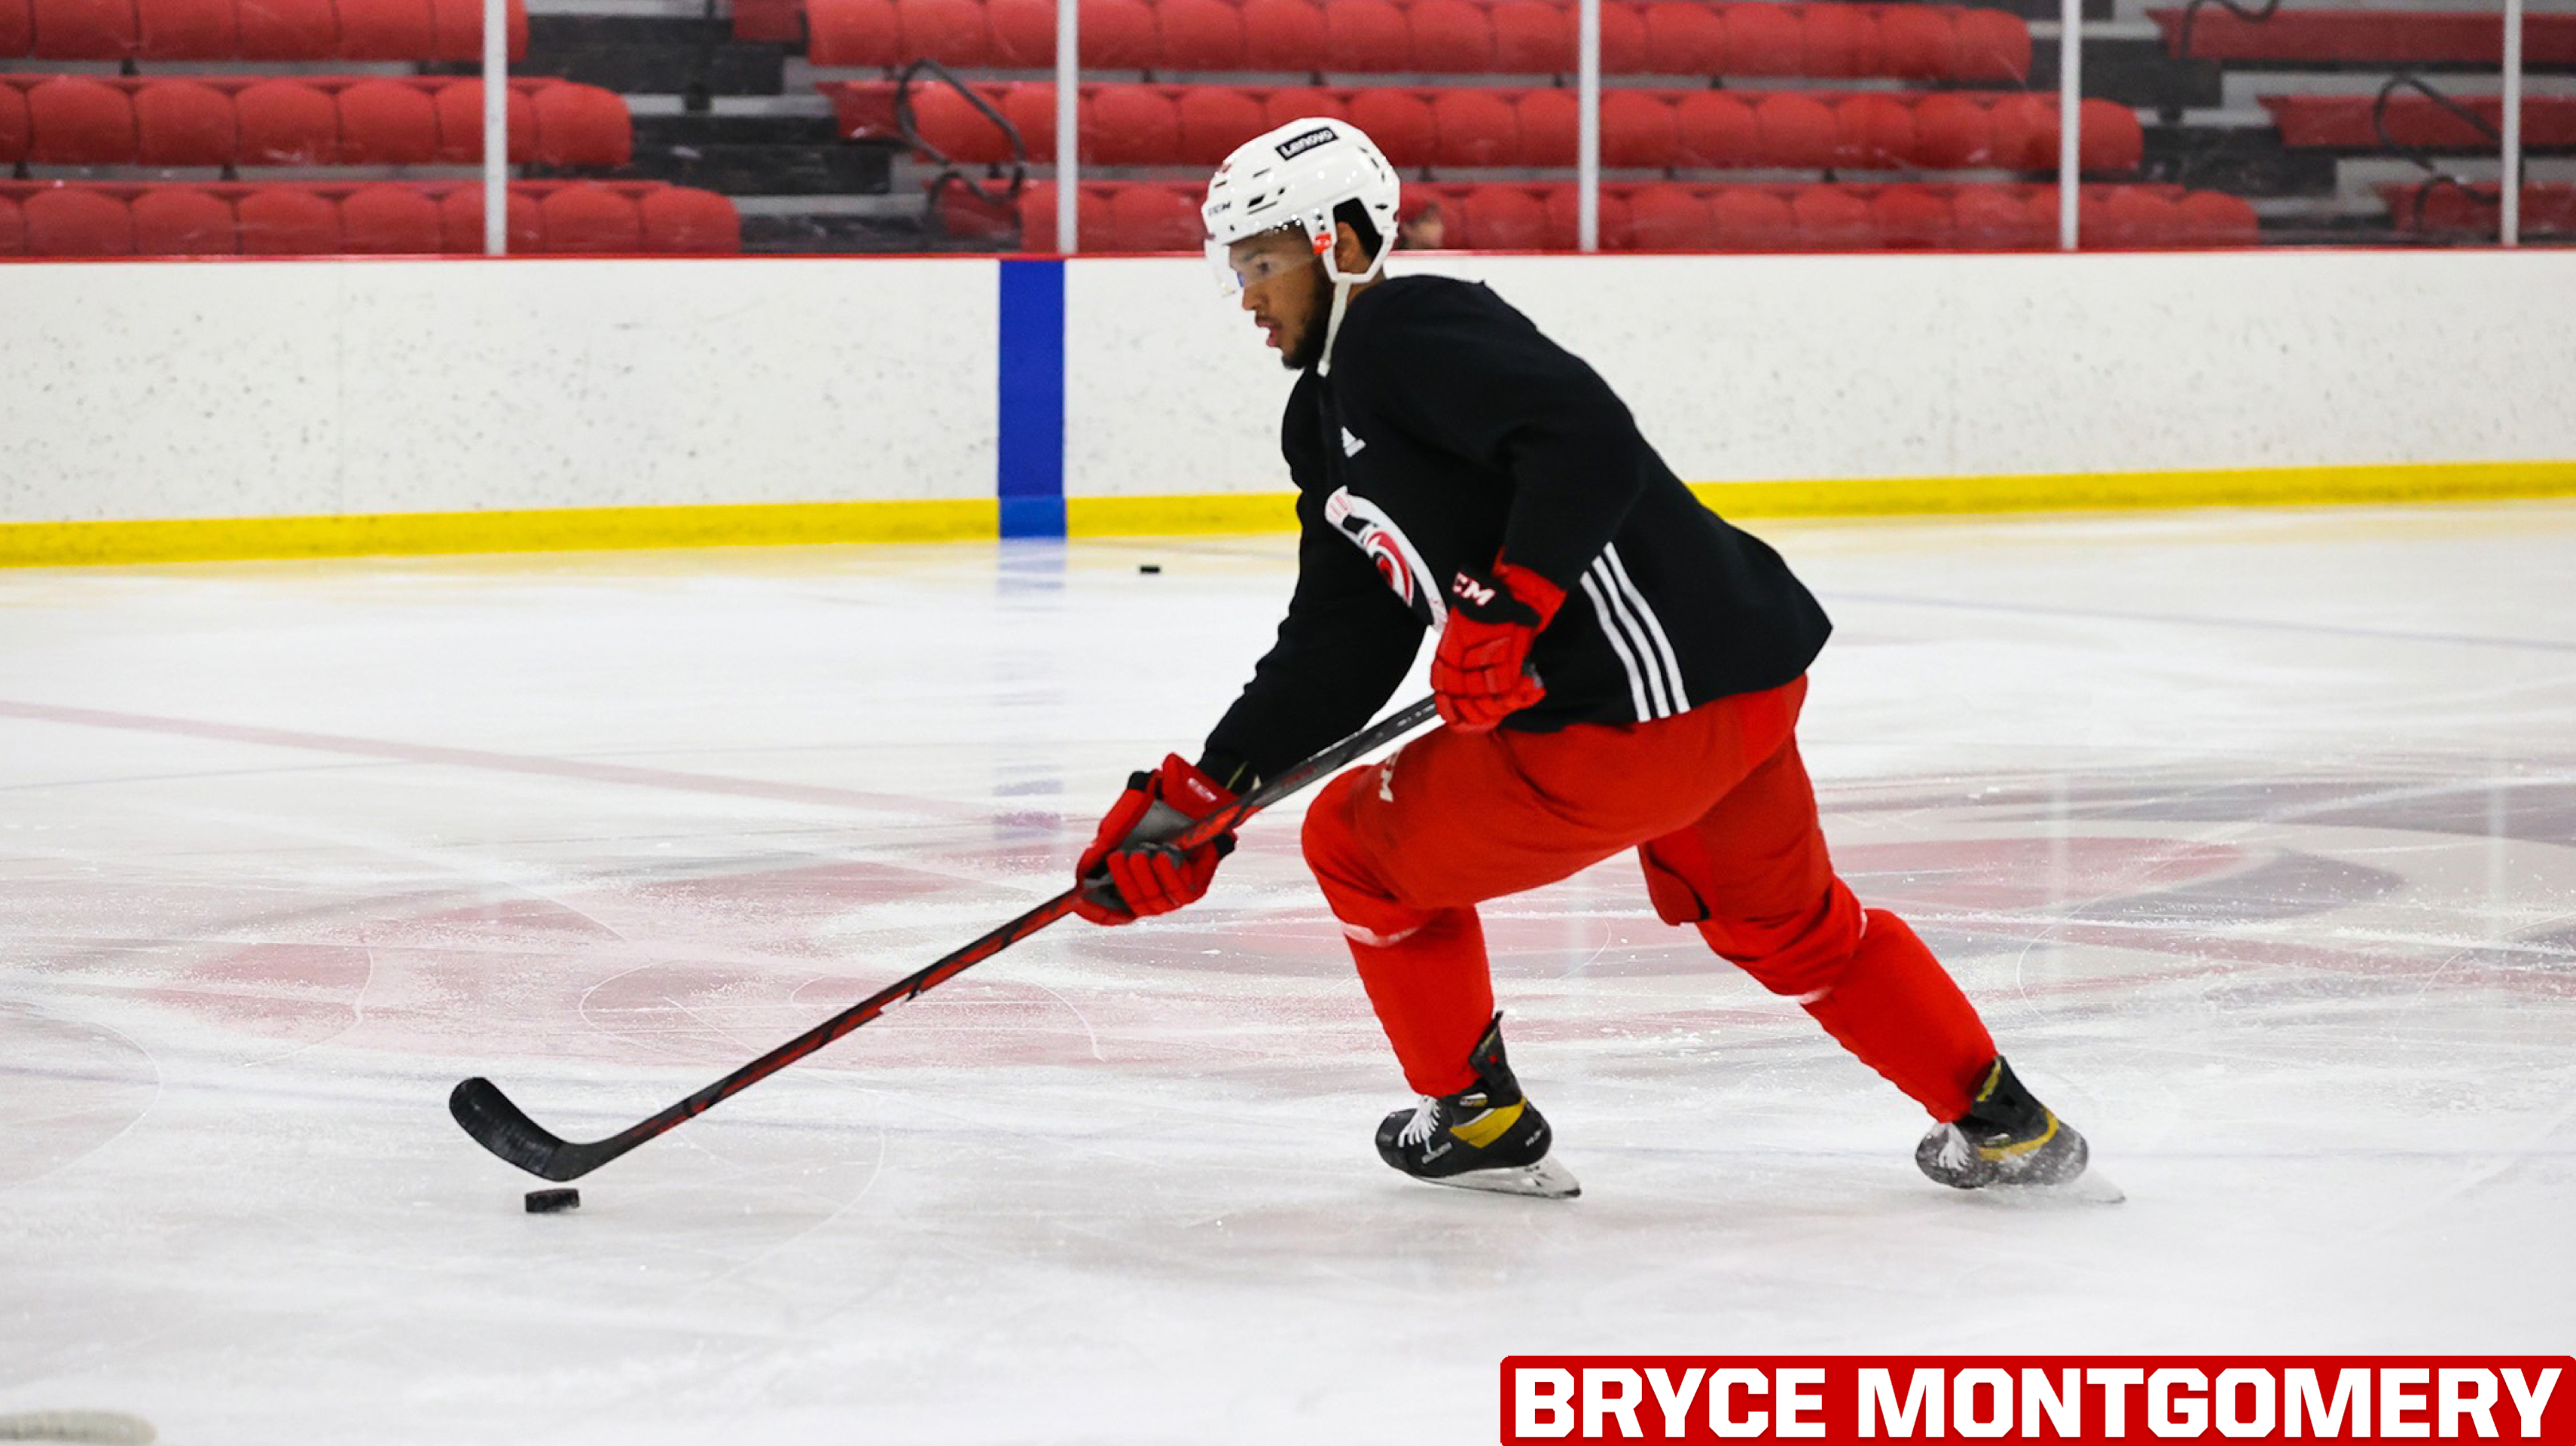 Carolina Hurricanes open training camp — perhaps with a draft of a